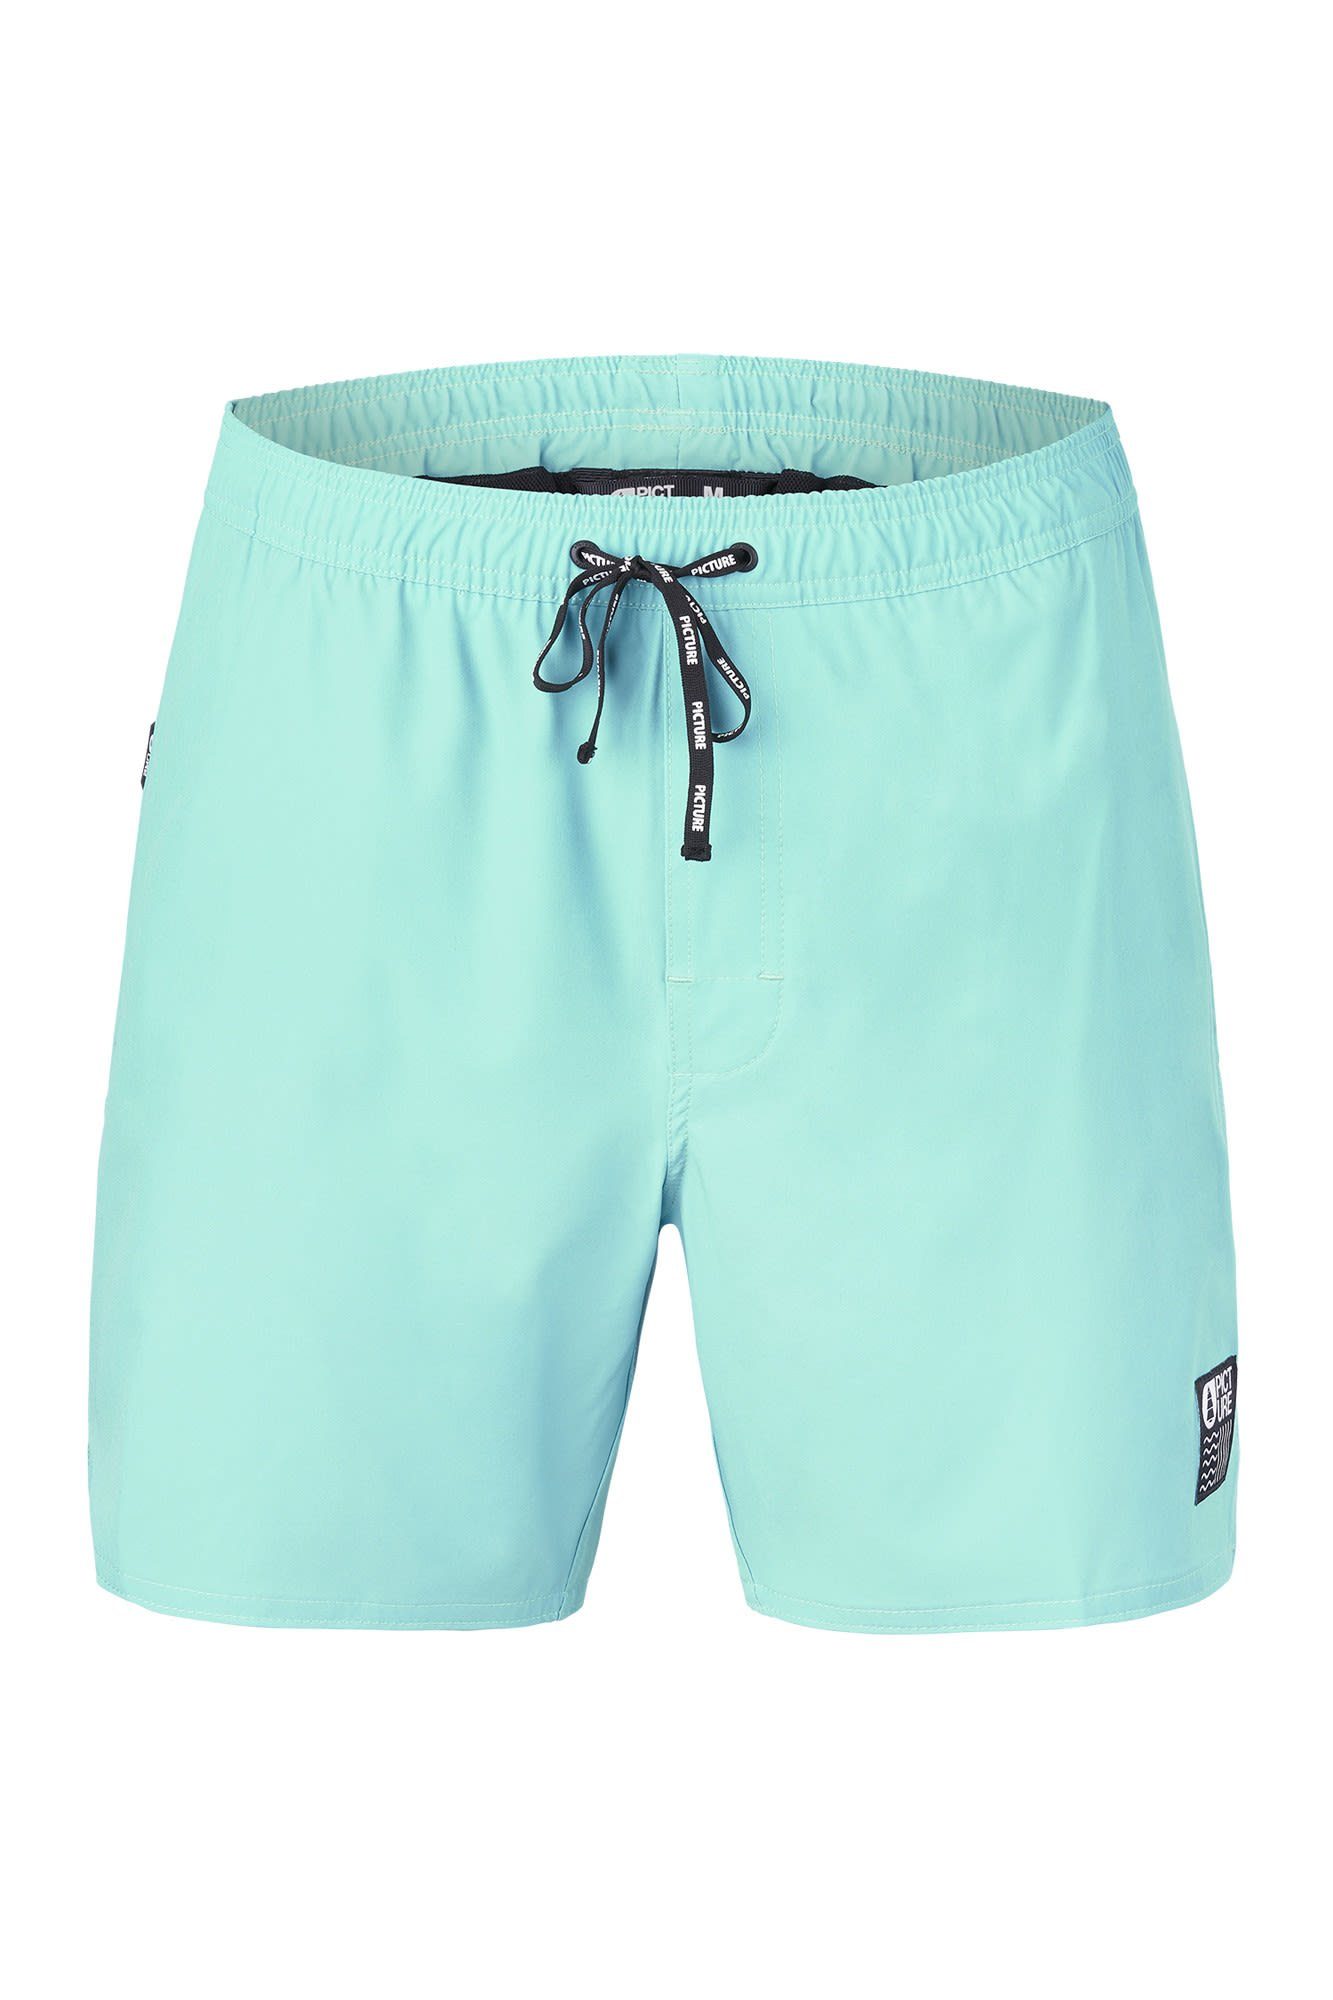 Picture Badeshorts Picture M Piau Solid 15 Boardshorts Herren Blue Turquoise